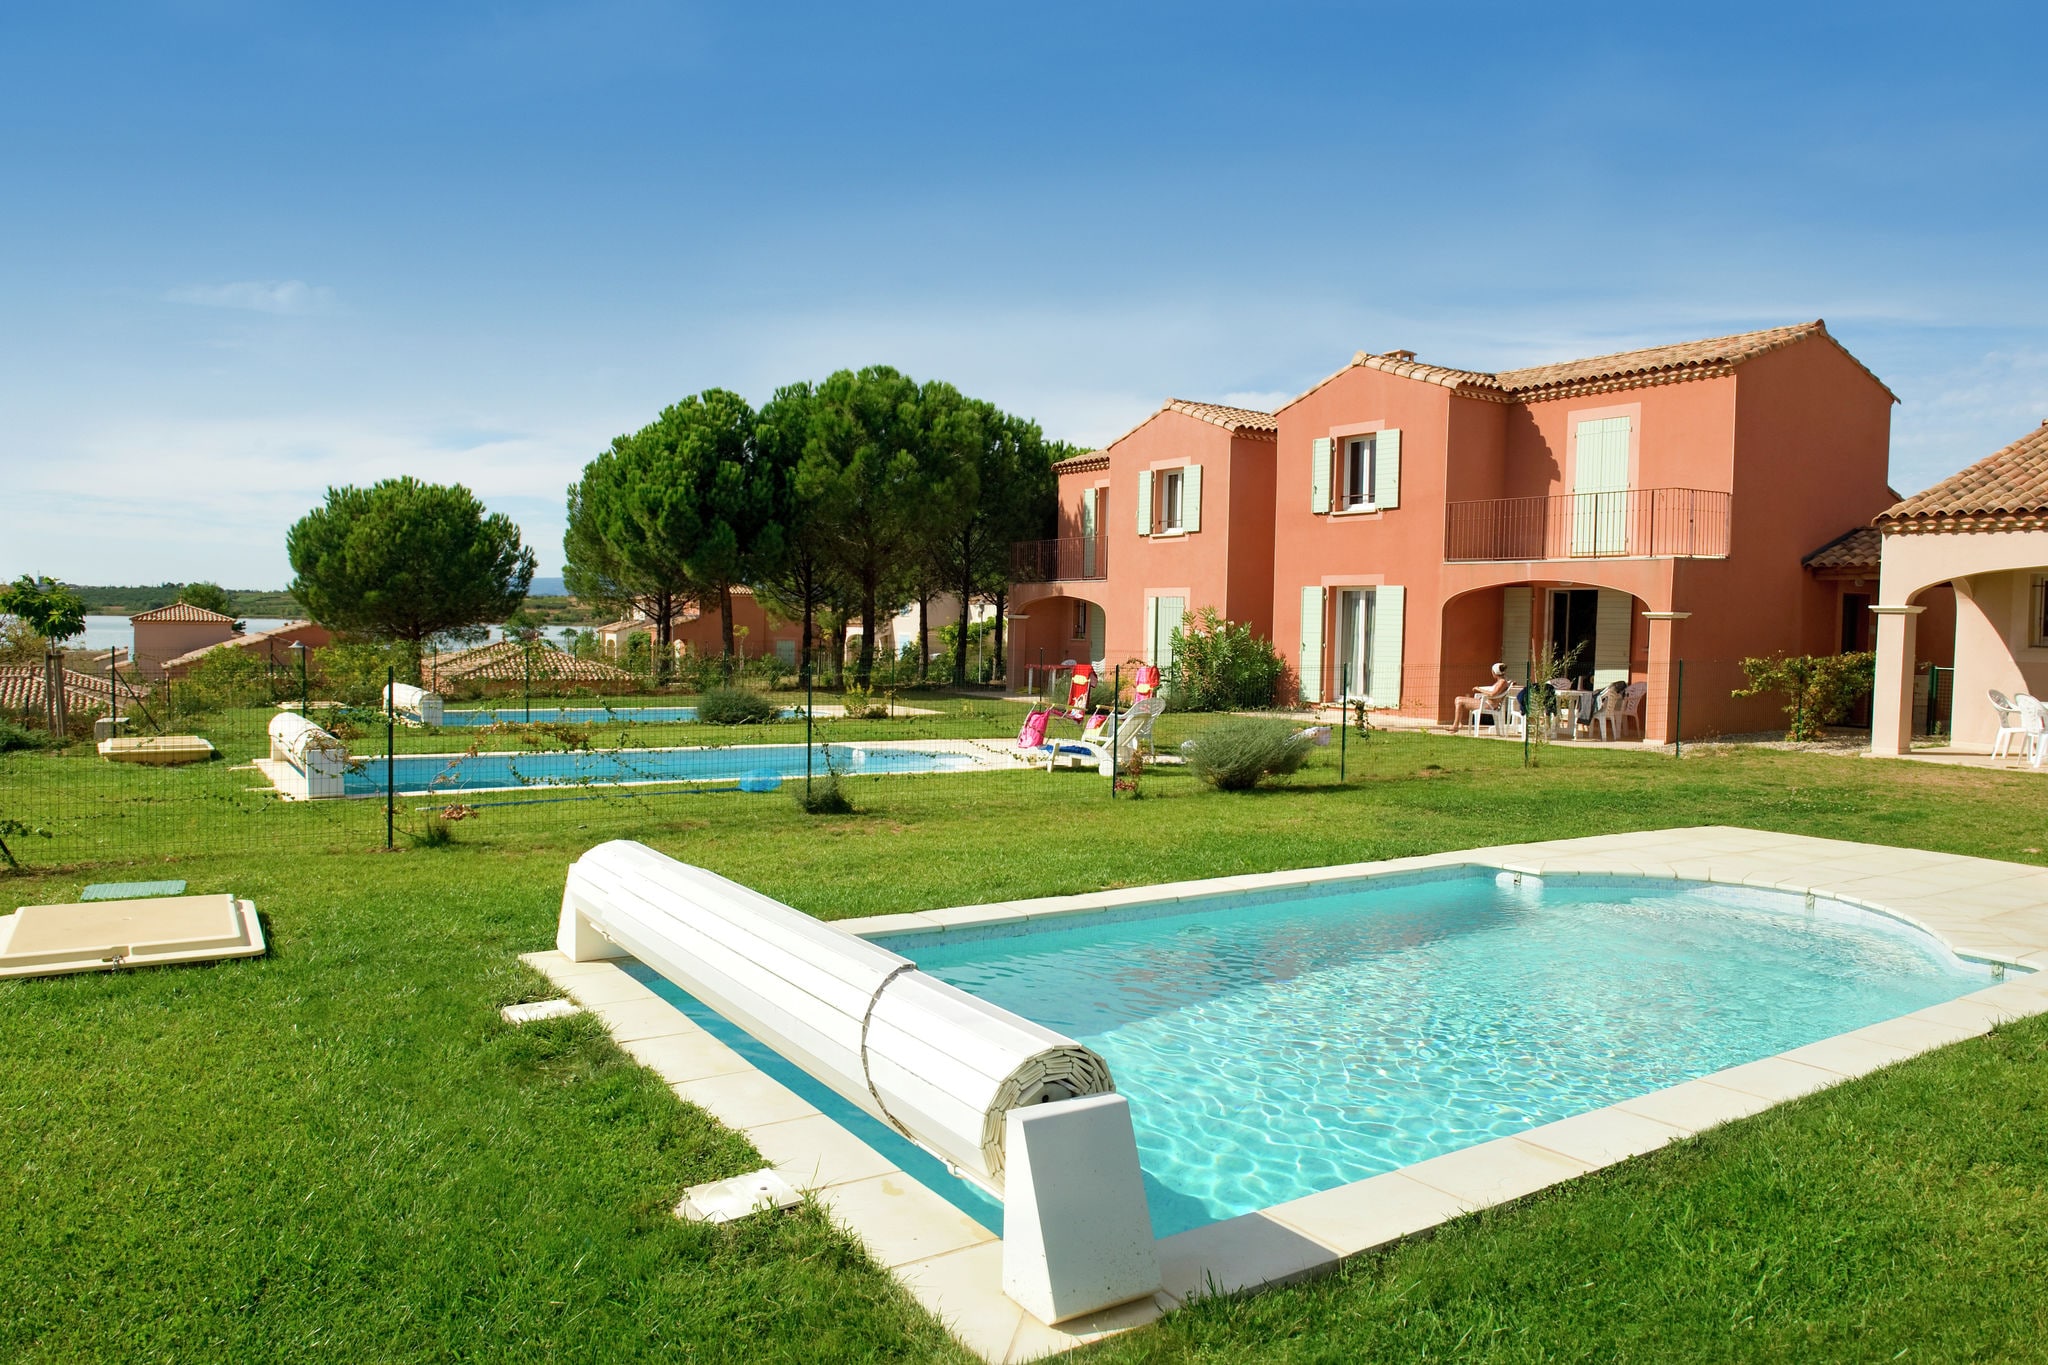 Summer villa with terrace or loggia, located in Languedoc